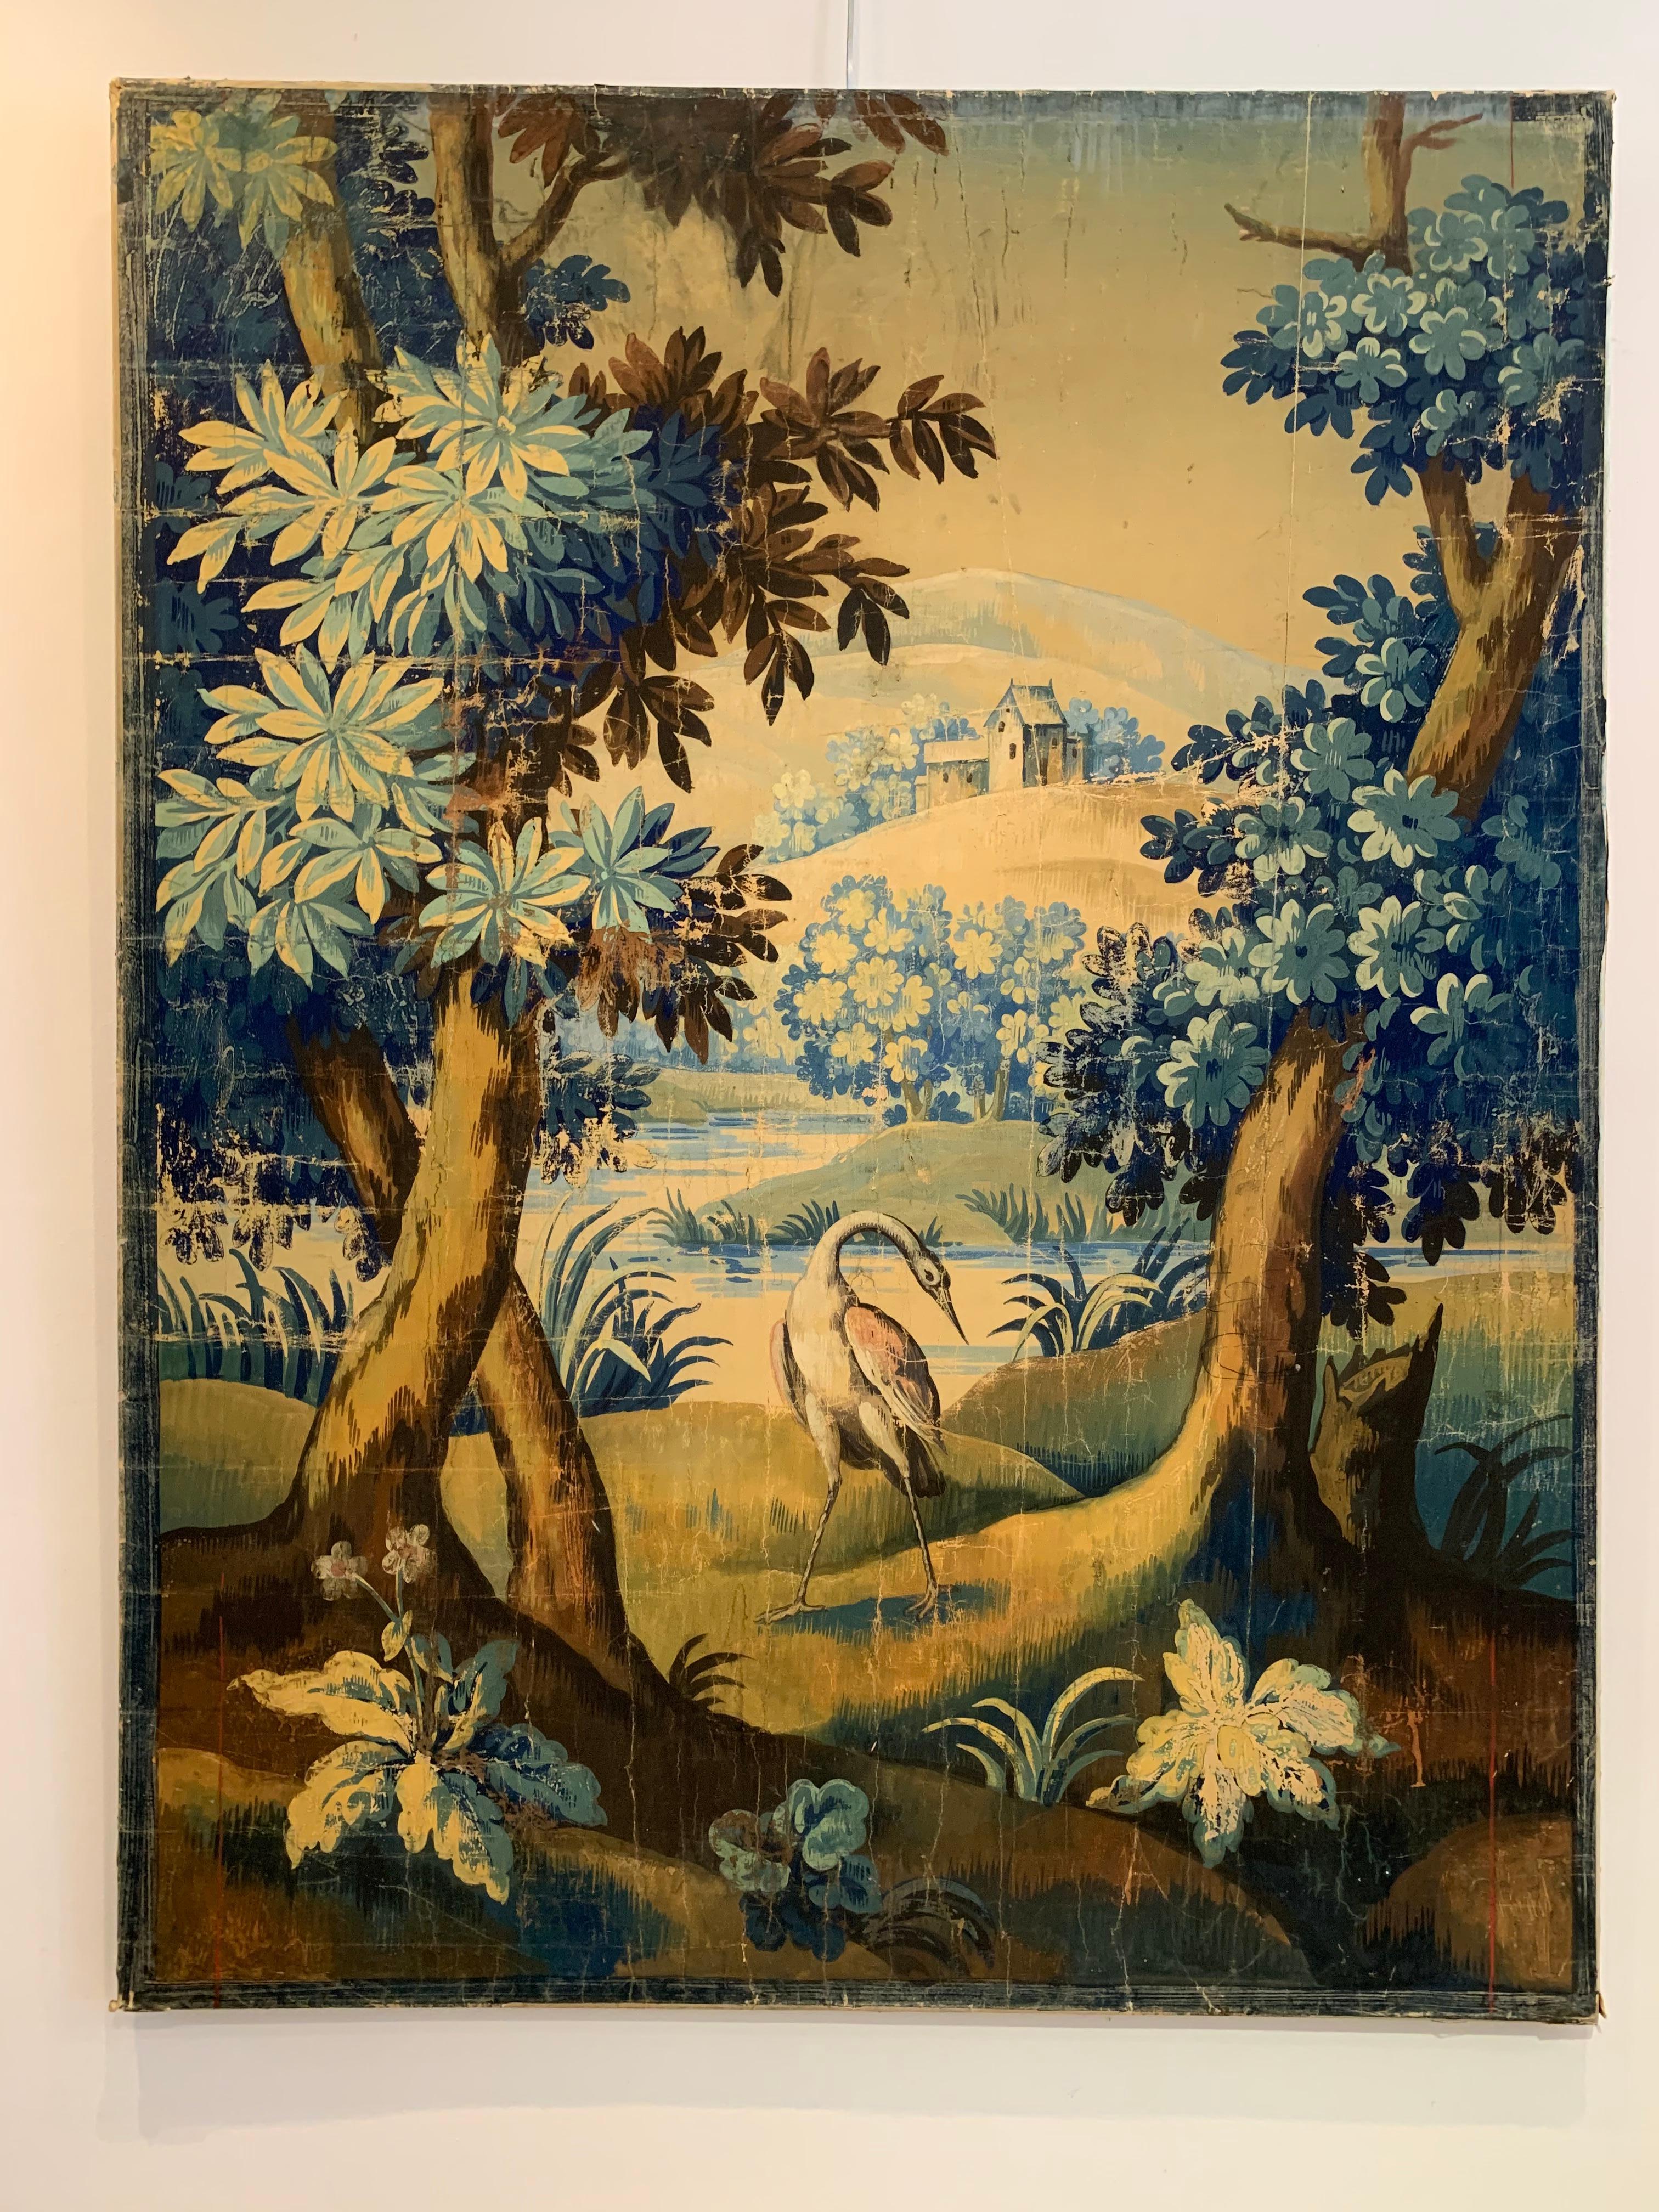 A wonderful early 19th century French cartoon painting which is painted on thick paper and wood backed.
The painting is a scene of lake, hills and forest view with a bird similar to a Crane in the foreground, standing between two leafy trees. The